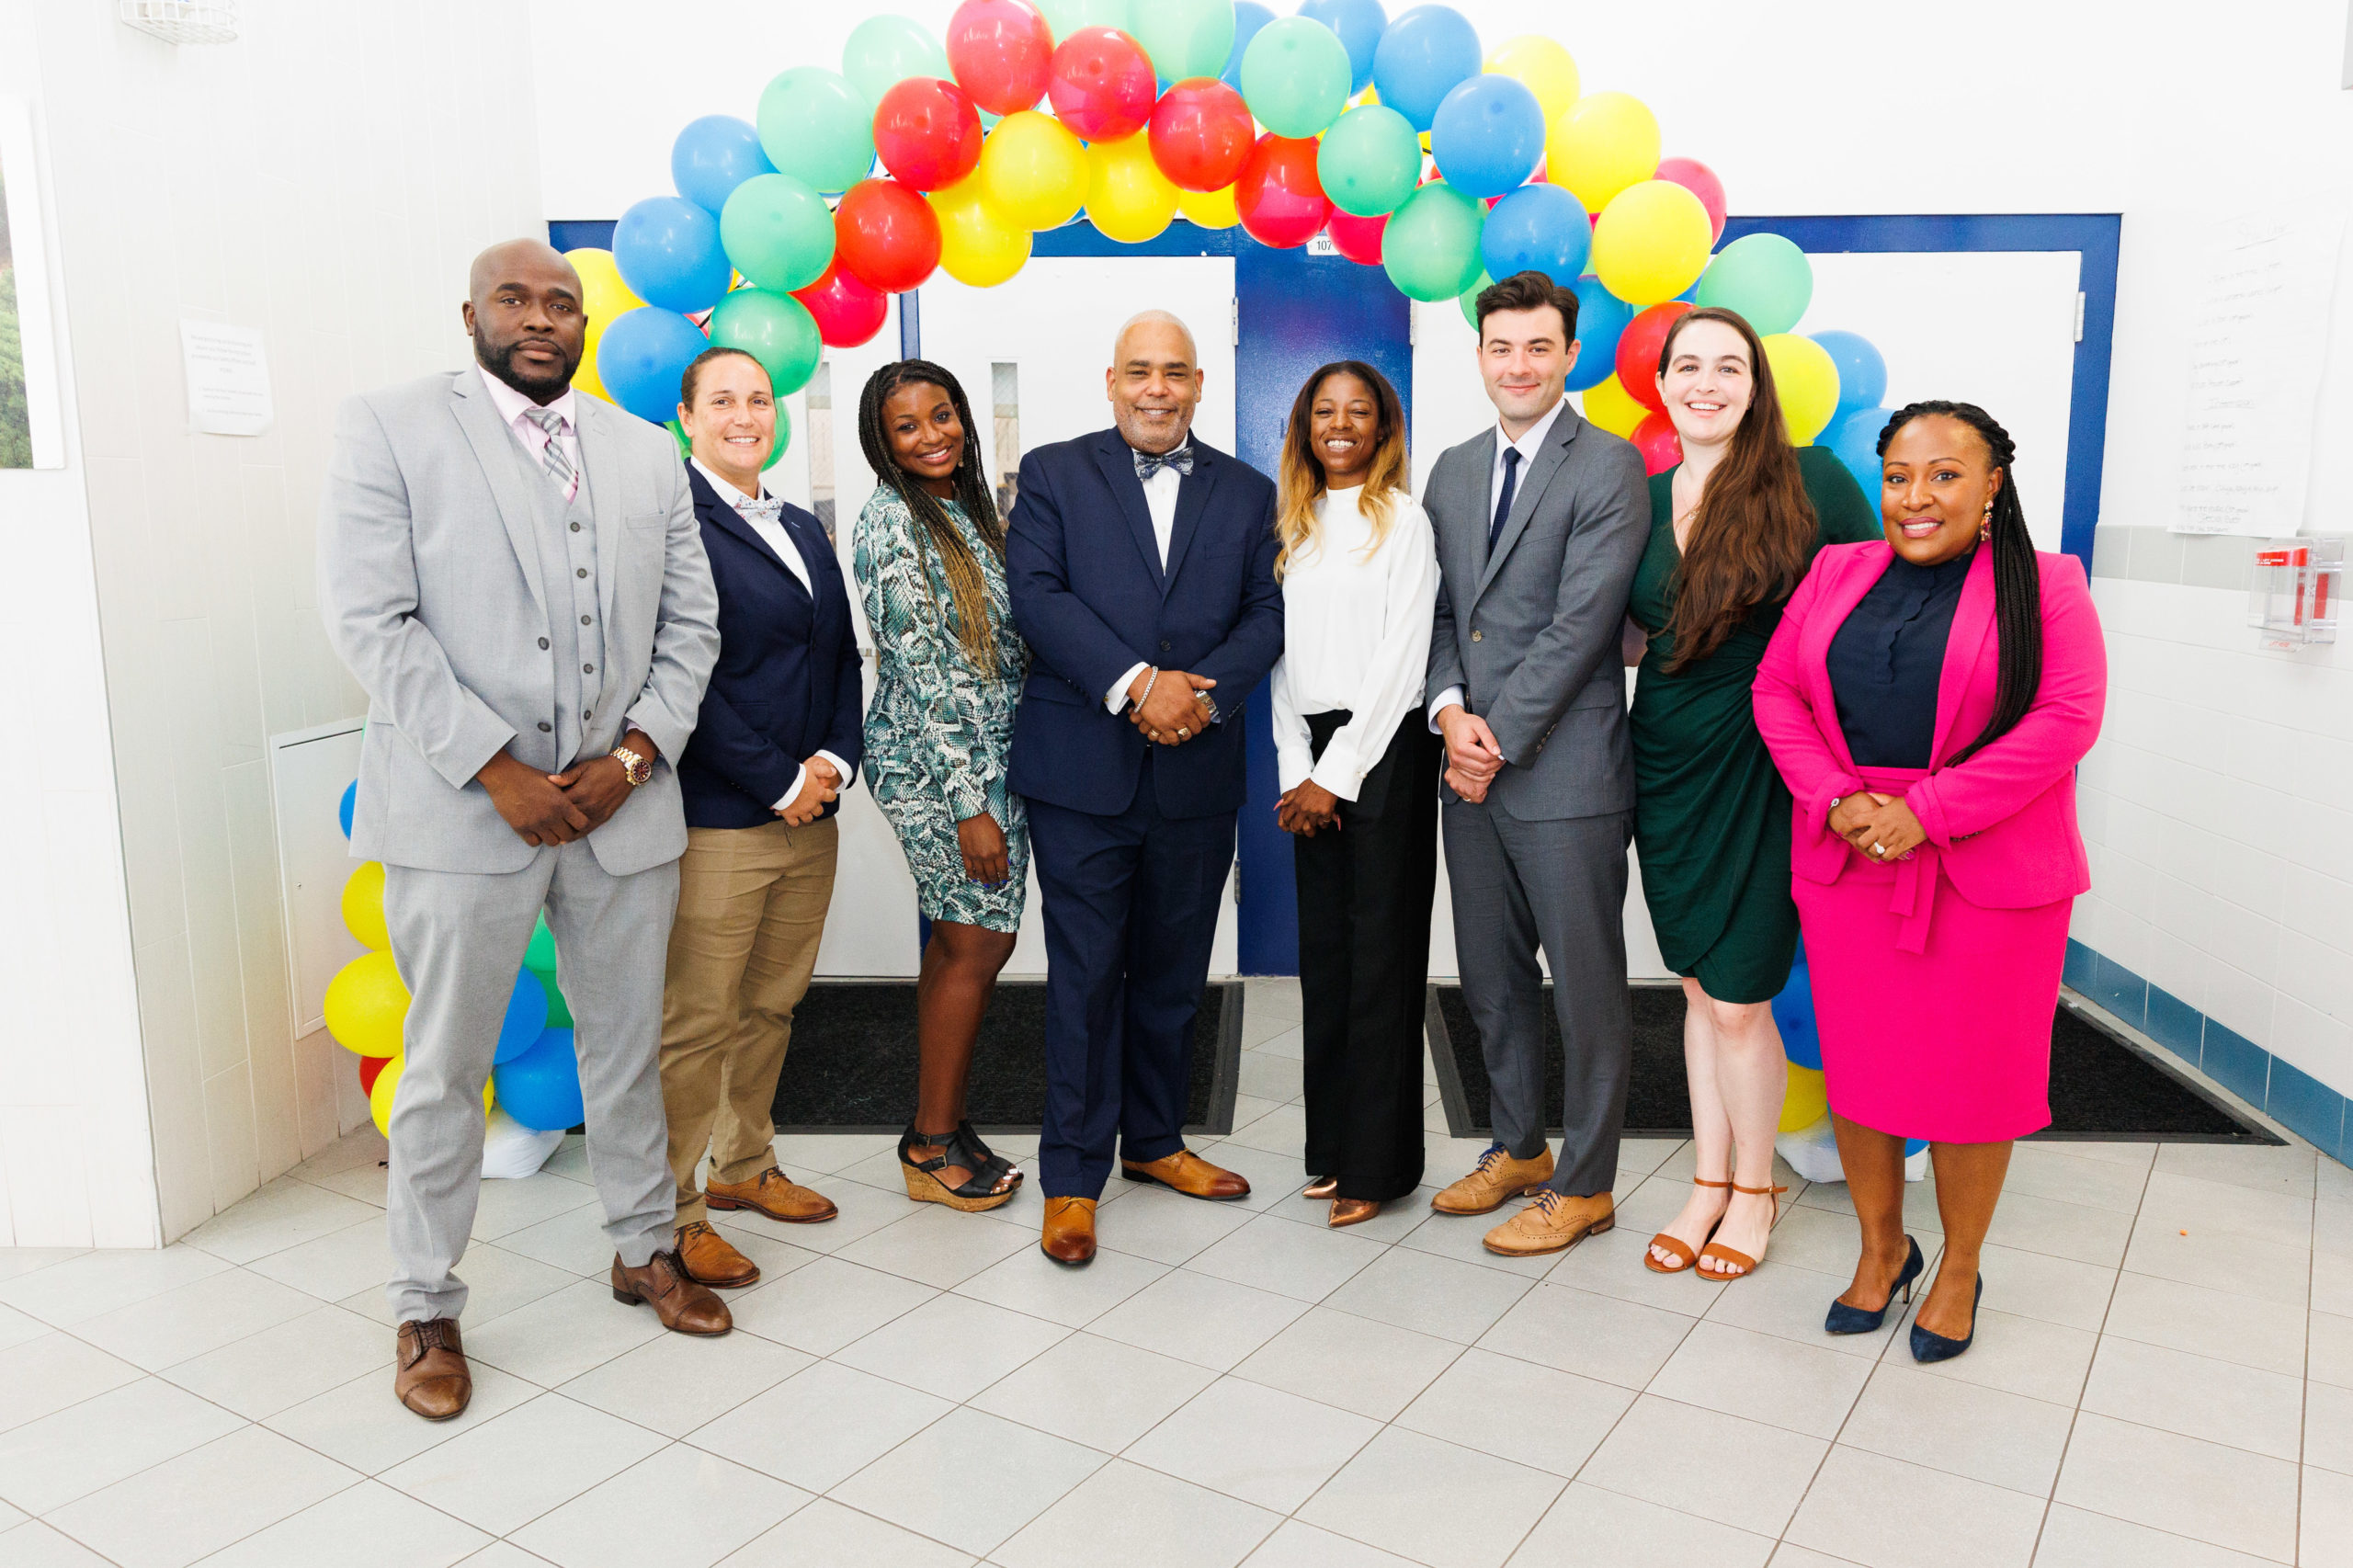 HCZ Promise Academy senior staff standing next to each other and multi-colored balloons